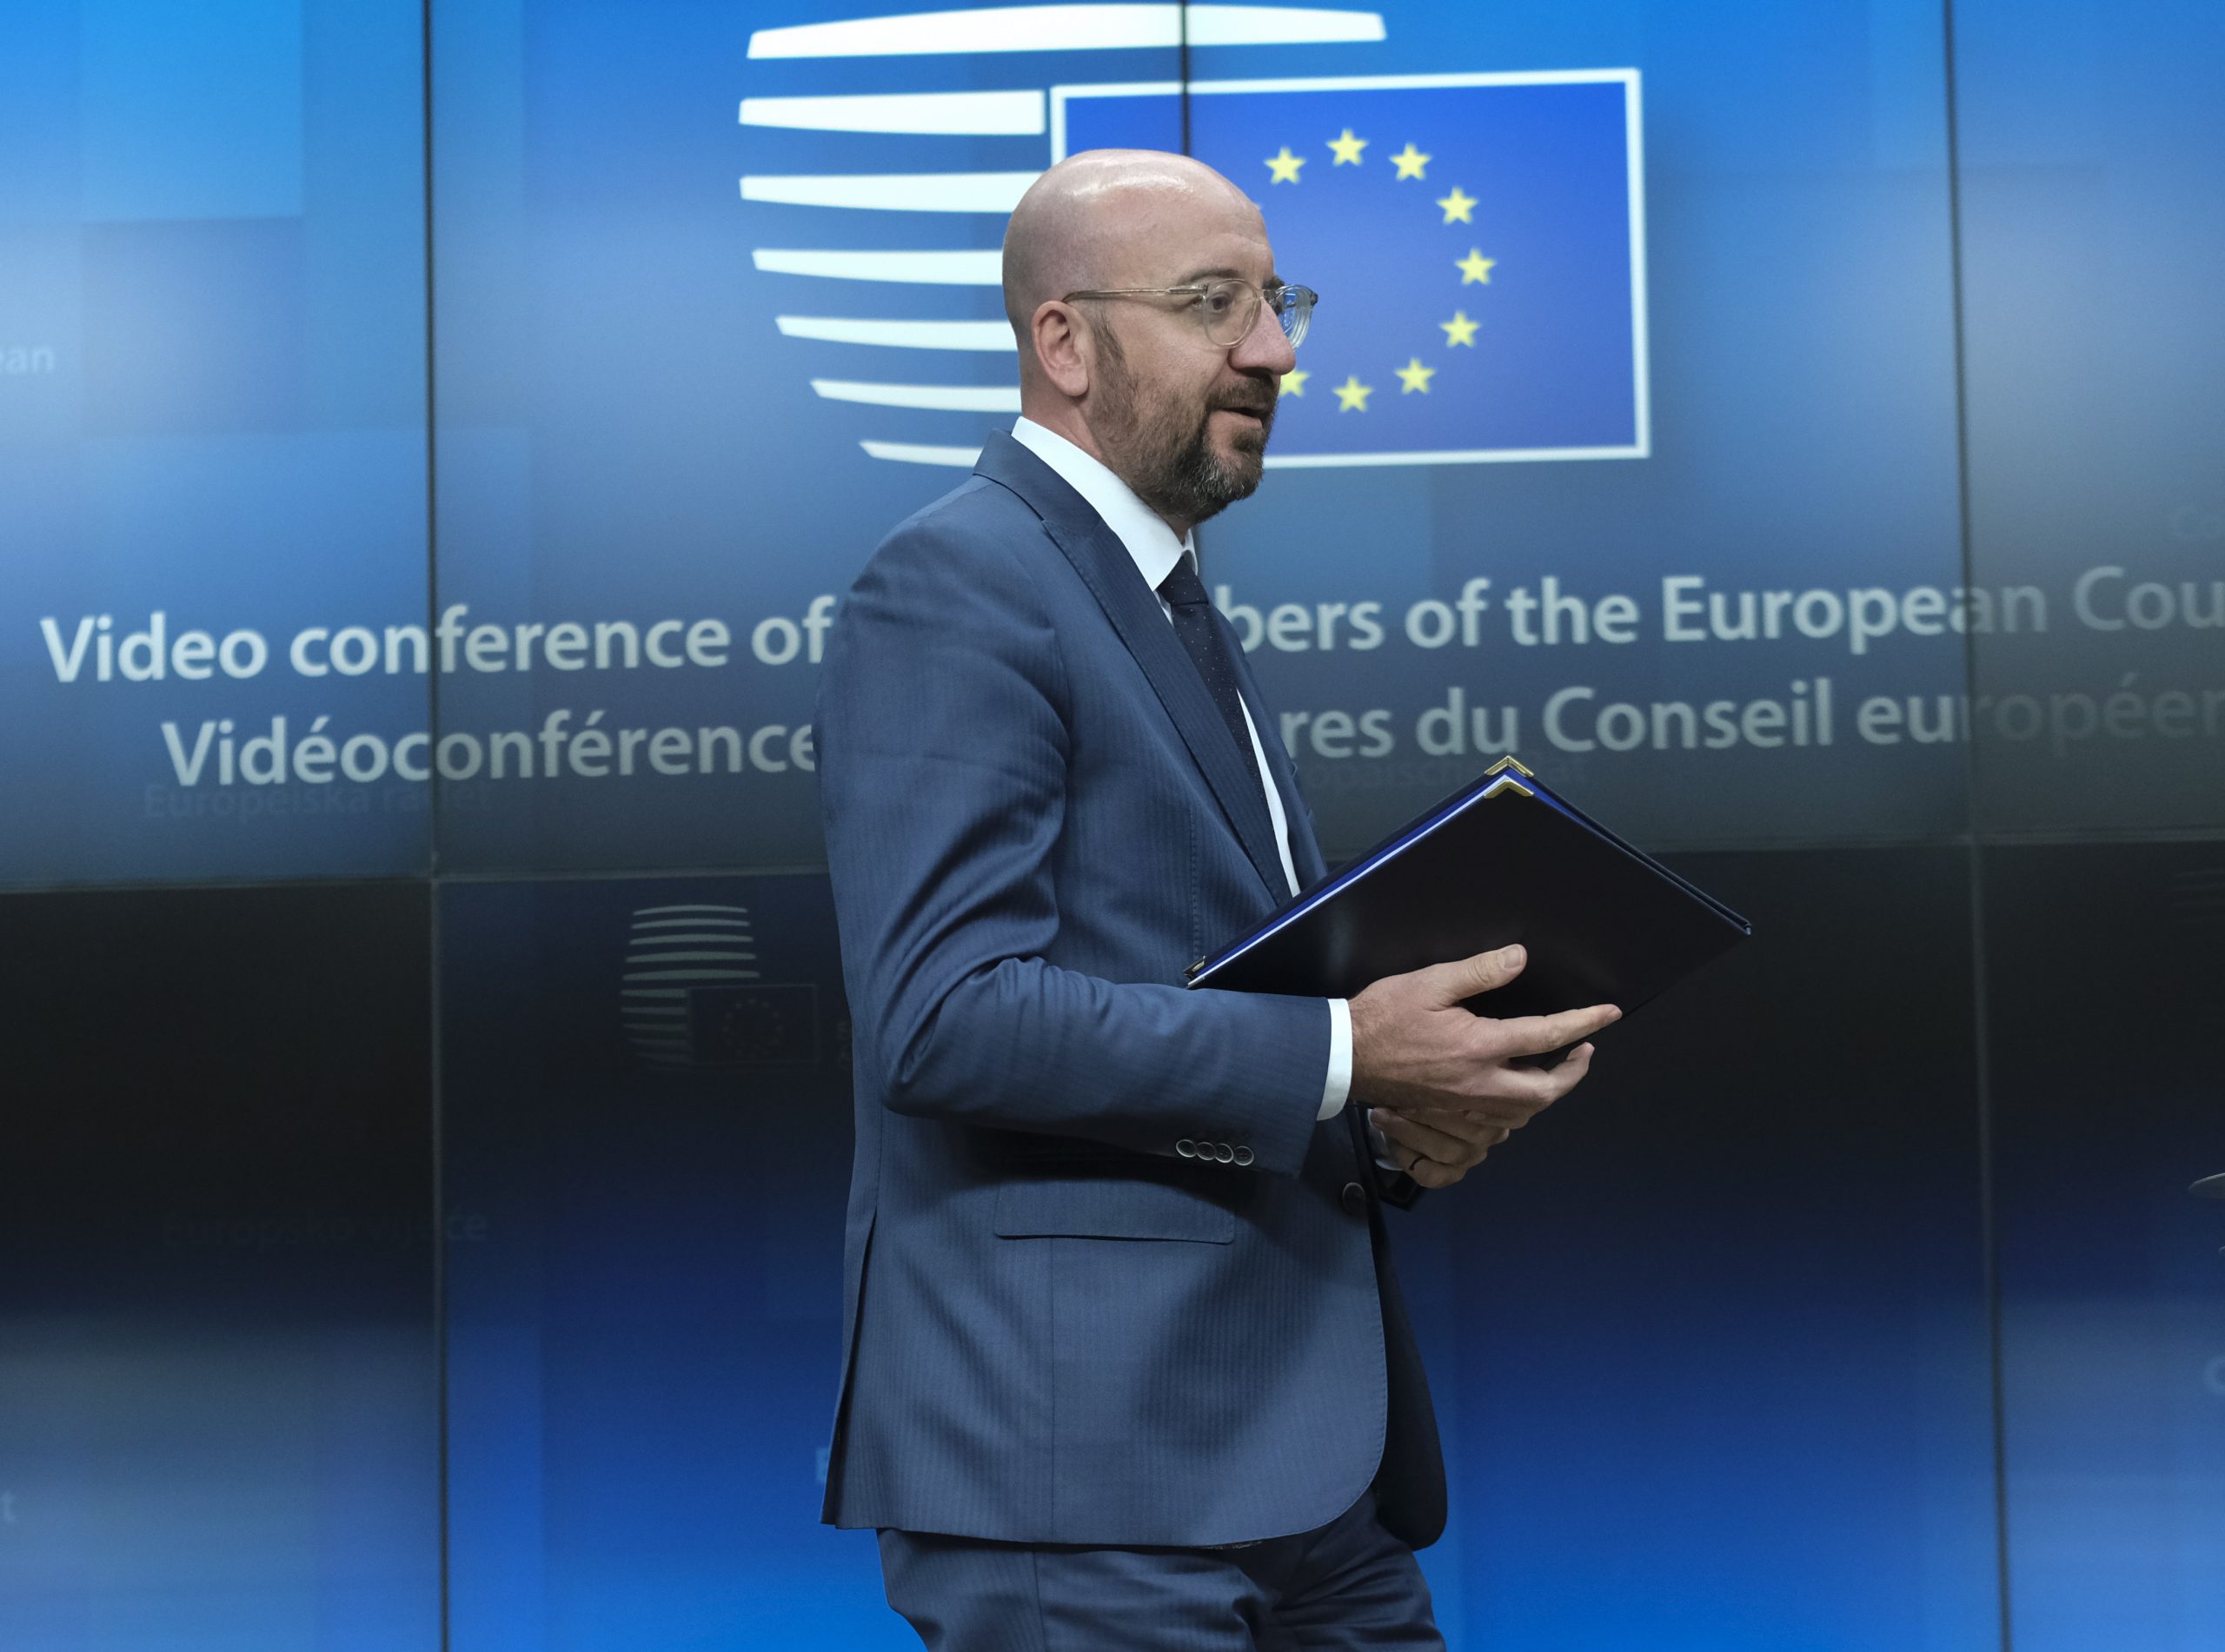 epa08380378 European Council President Charles Michel arrives for a joint a news conference with European Commission President Ursula Von Der Leyen (unseen) after a video conferenced EU summit with  European heads of state and governments to discuss measures related to the COVID-19 disease, in Brussels, Belgium, 23 April 2020.  EPA/OLIVIER HOSLET / POOL